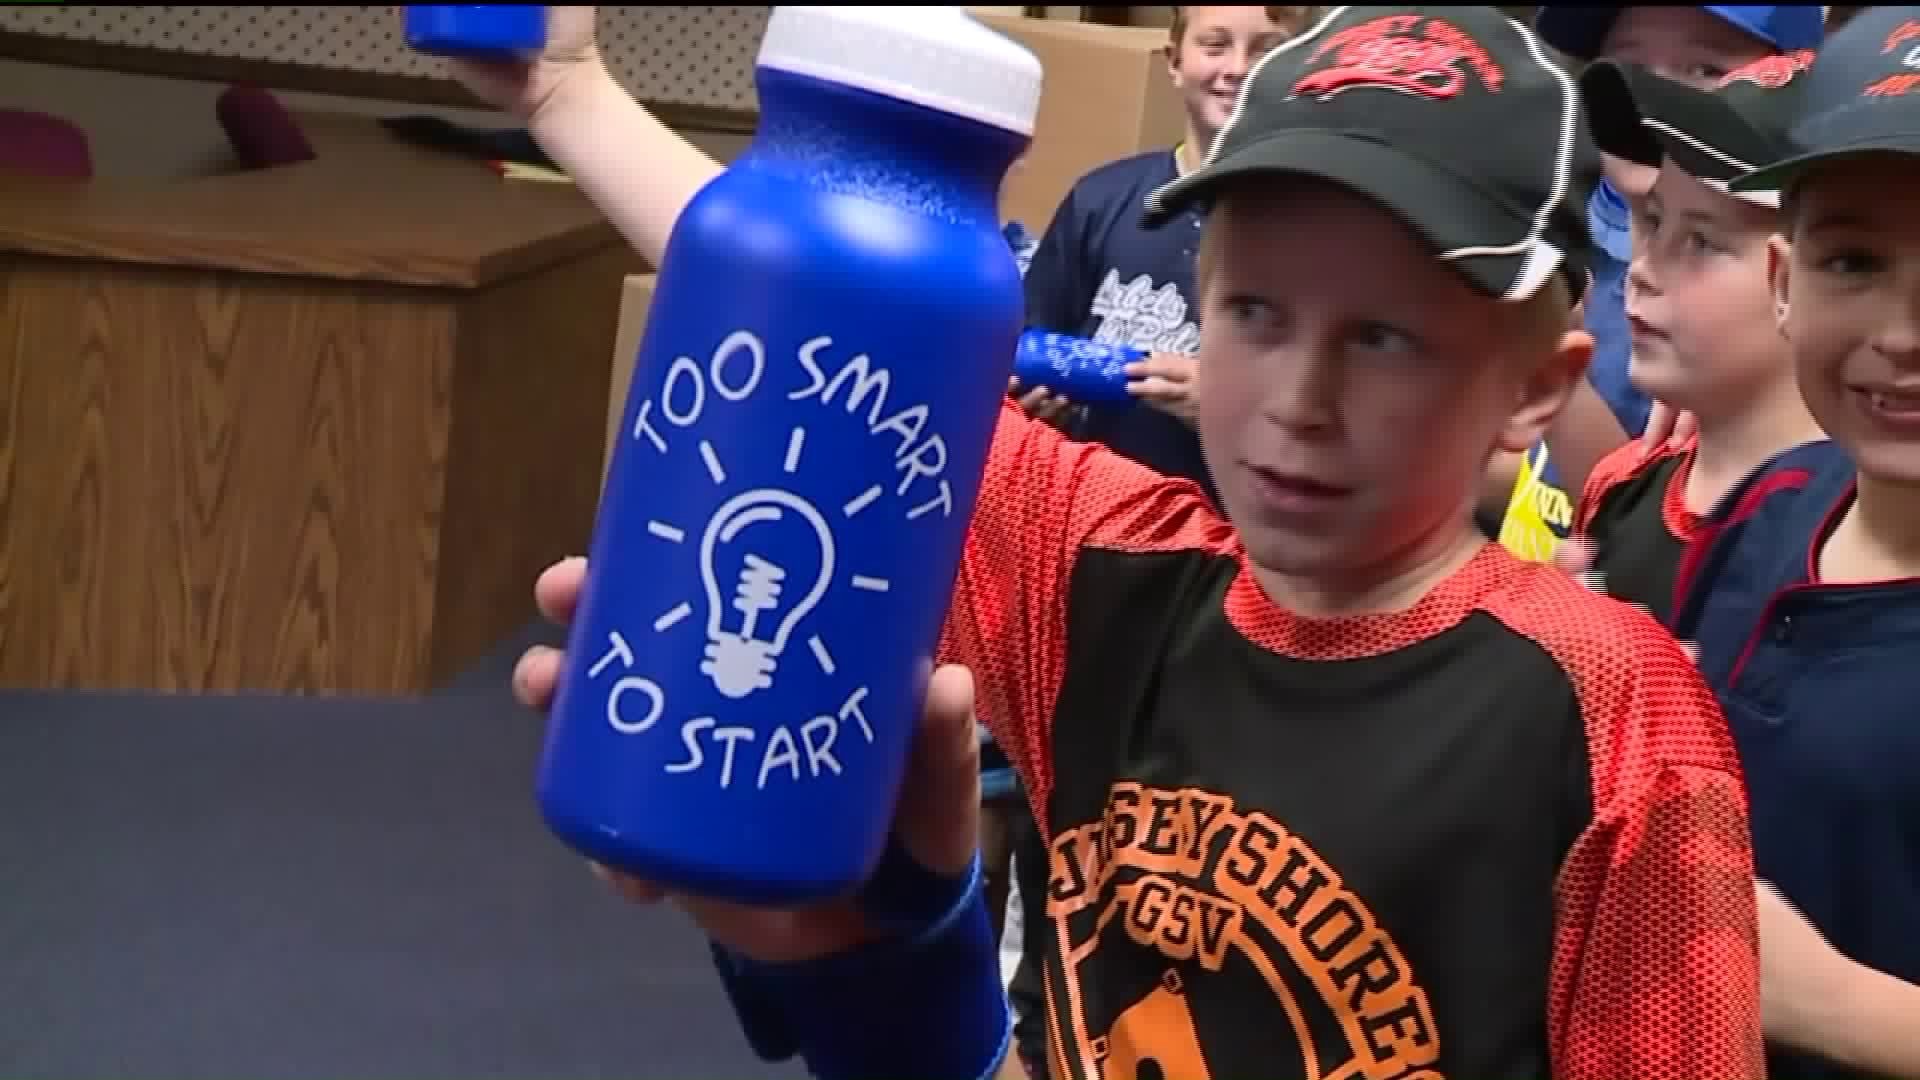 Little League Volunteer Spearheading 'Too Smart to Start' Anti-drug Campaign